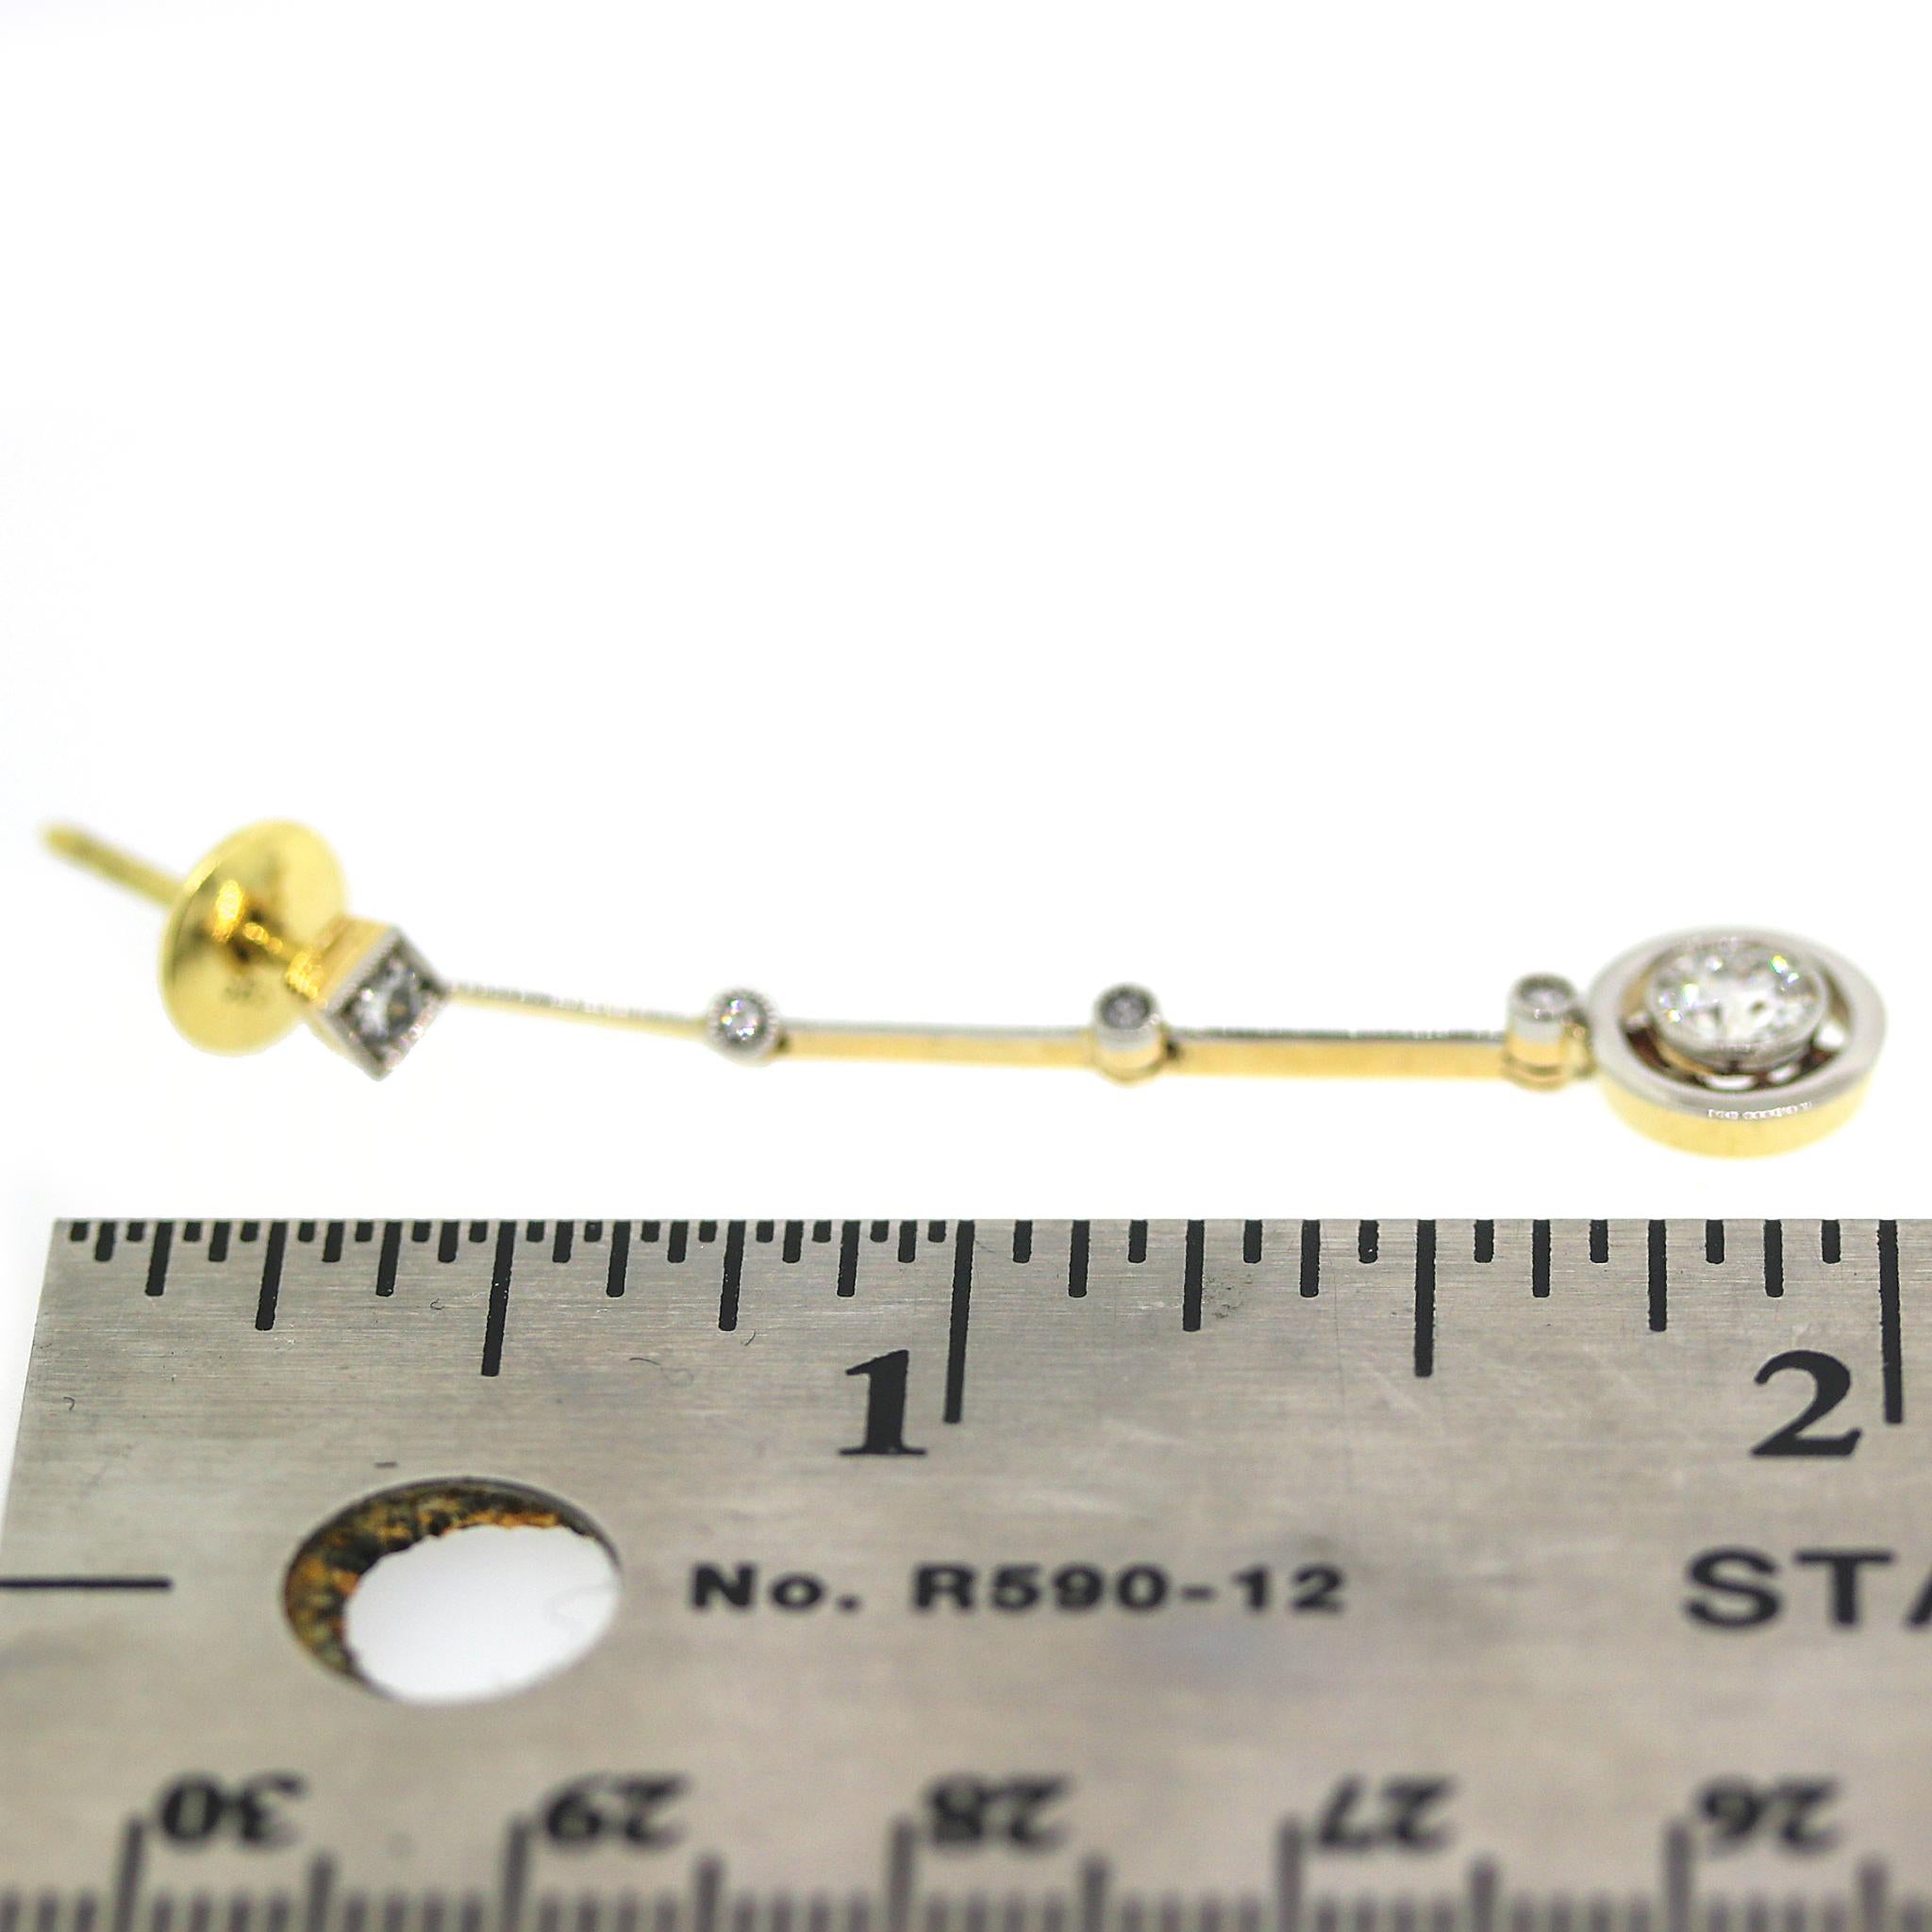 SOLID GOLD DIAMOND DROP EARRINGS

18 kt Yellow Gold
Diamond: 0.80 ct twd
Length: 1.75 inches
Total Weight: 4.3 grams